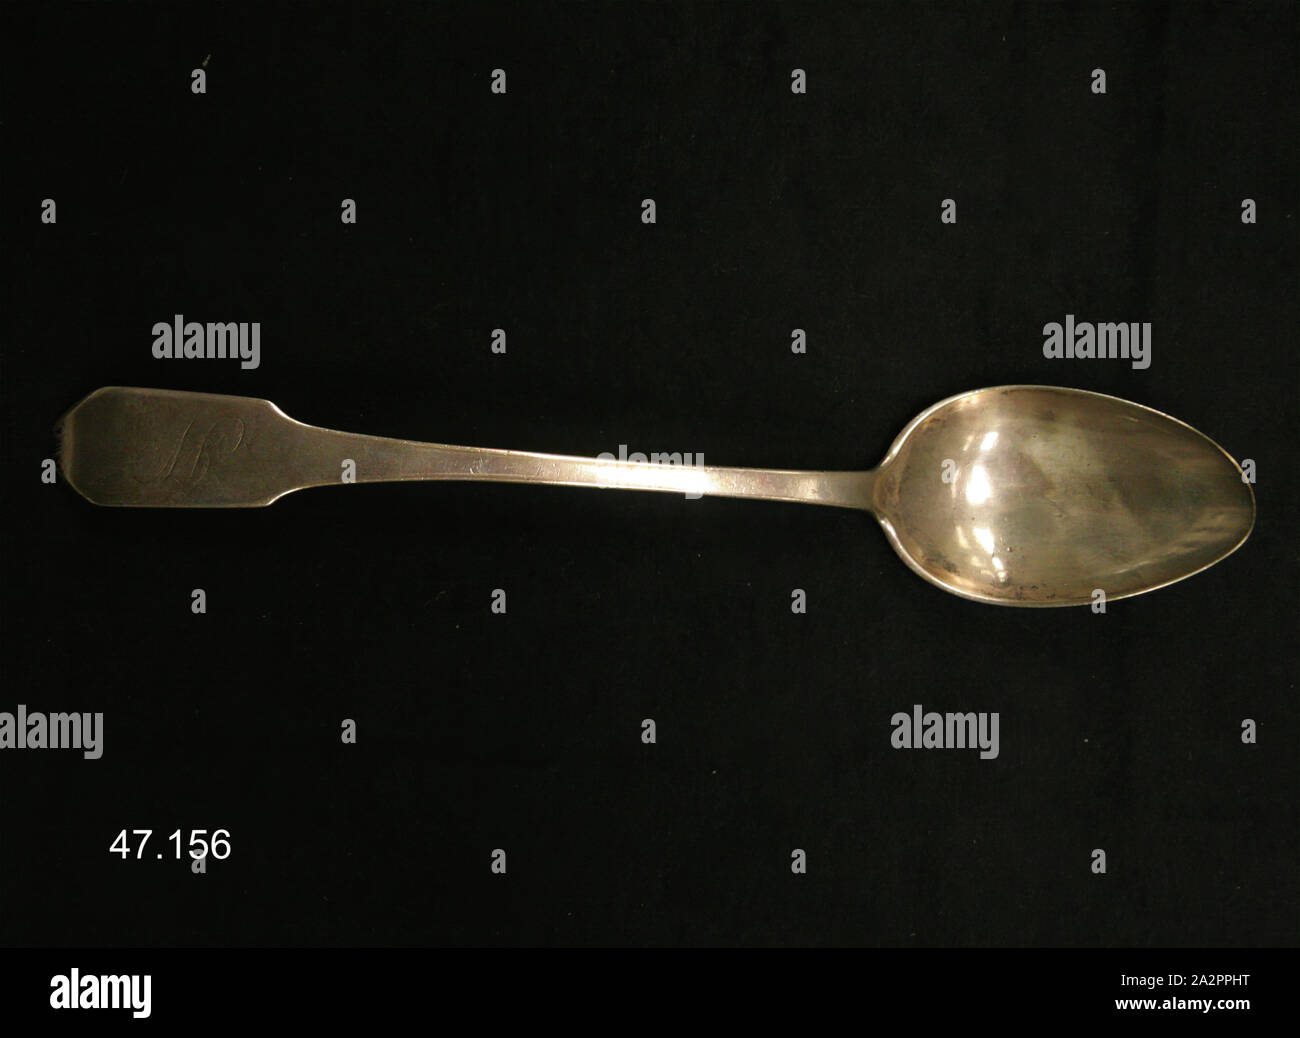 AllSpice Stainless Steel Double Sided Measuring Spoon- Teaspoon and  Tablespoon